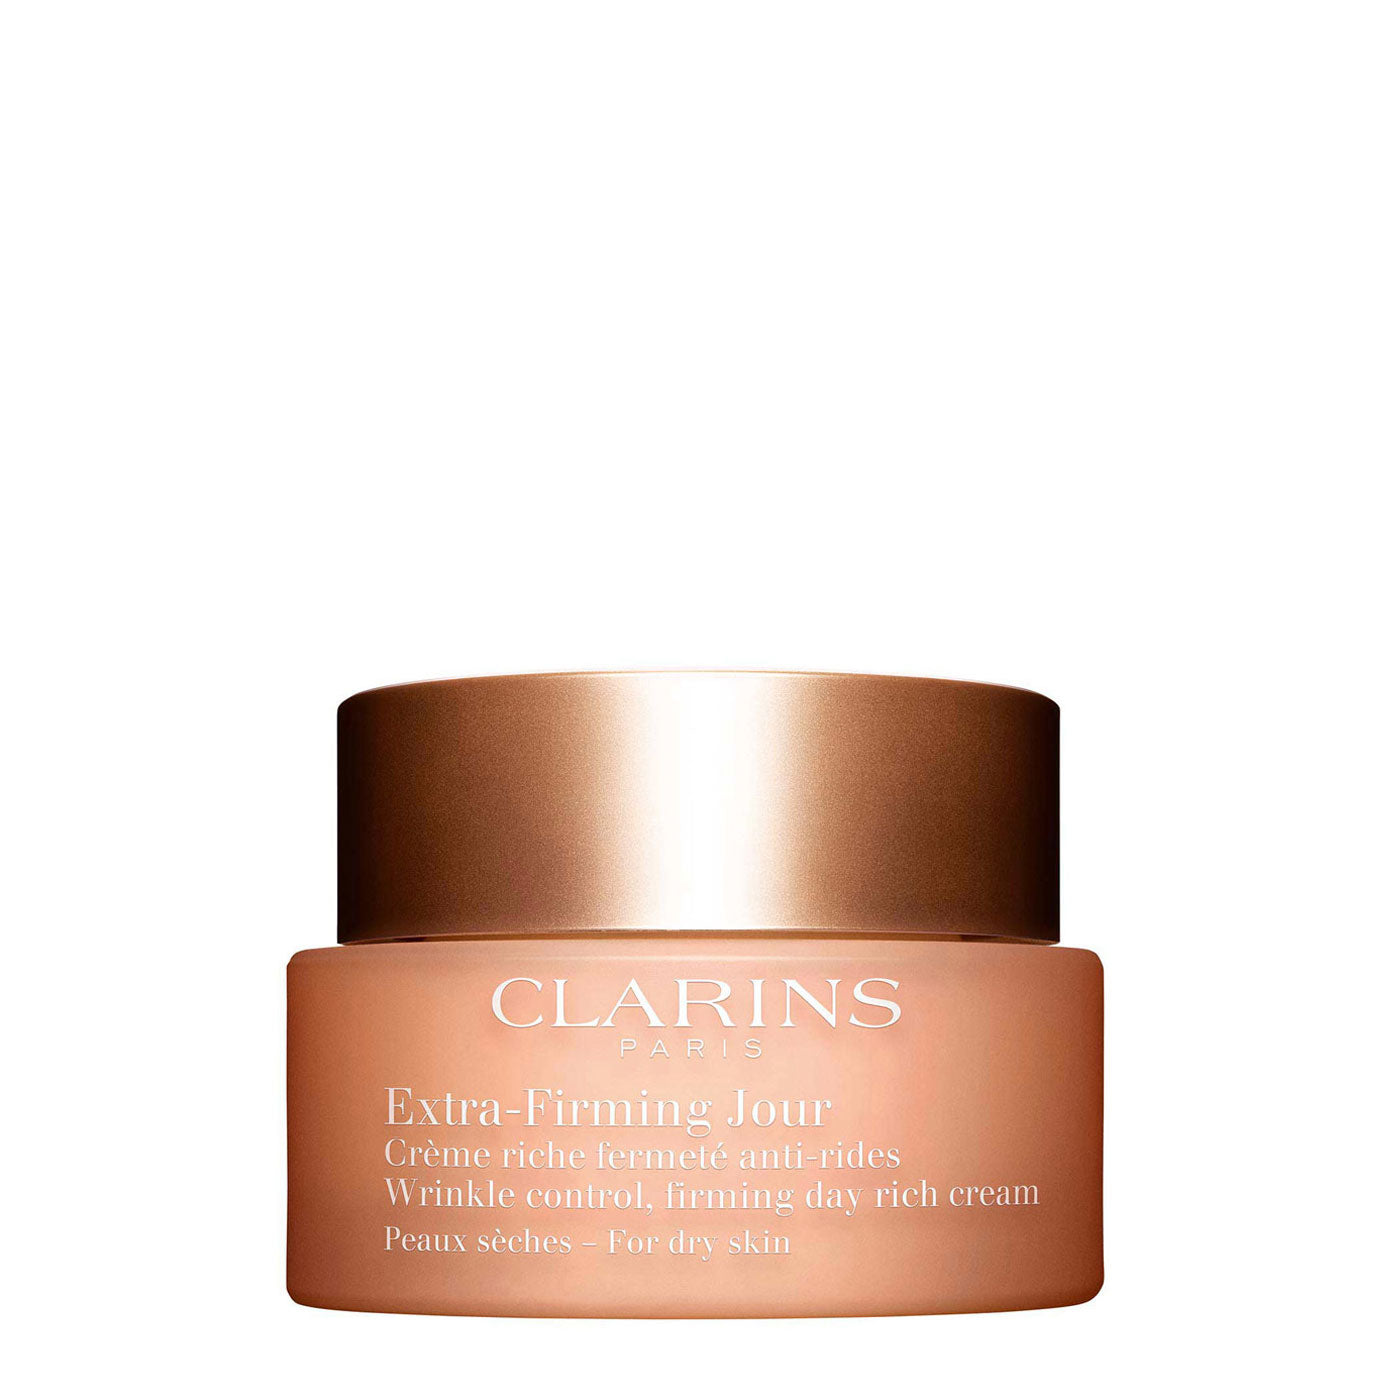 Clarins - Extra-Firming Jour - For Dry Skin (50ml)